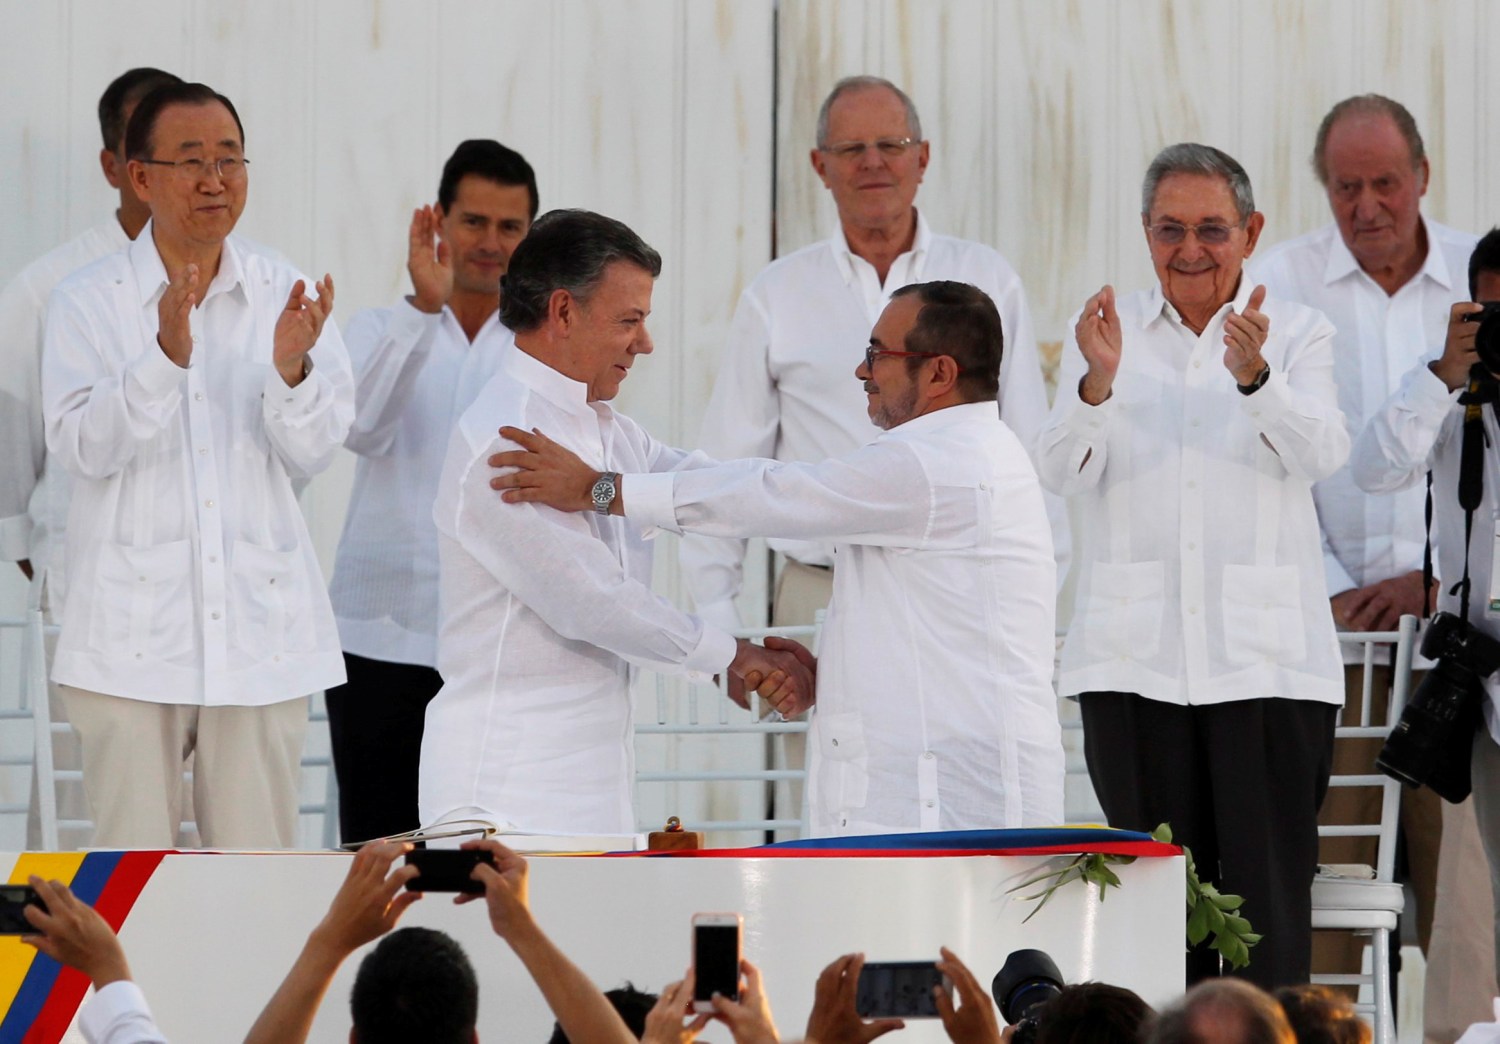 Colombian President Juan Manuel Santos (L) and Marxist rebel leader Timochenko shake hands after signing an accord ending a half-century war that killed a quarter of a million people, in Cartagena, Colombia September 26, 2016. REUTERS/John Vizcaino/File Photo TPX IMAGES OF THE DAY - RTSR69M